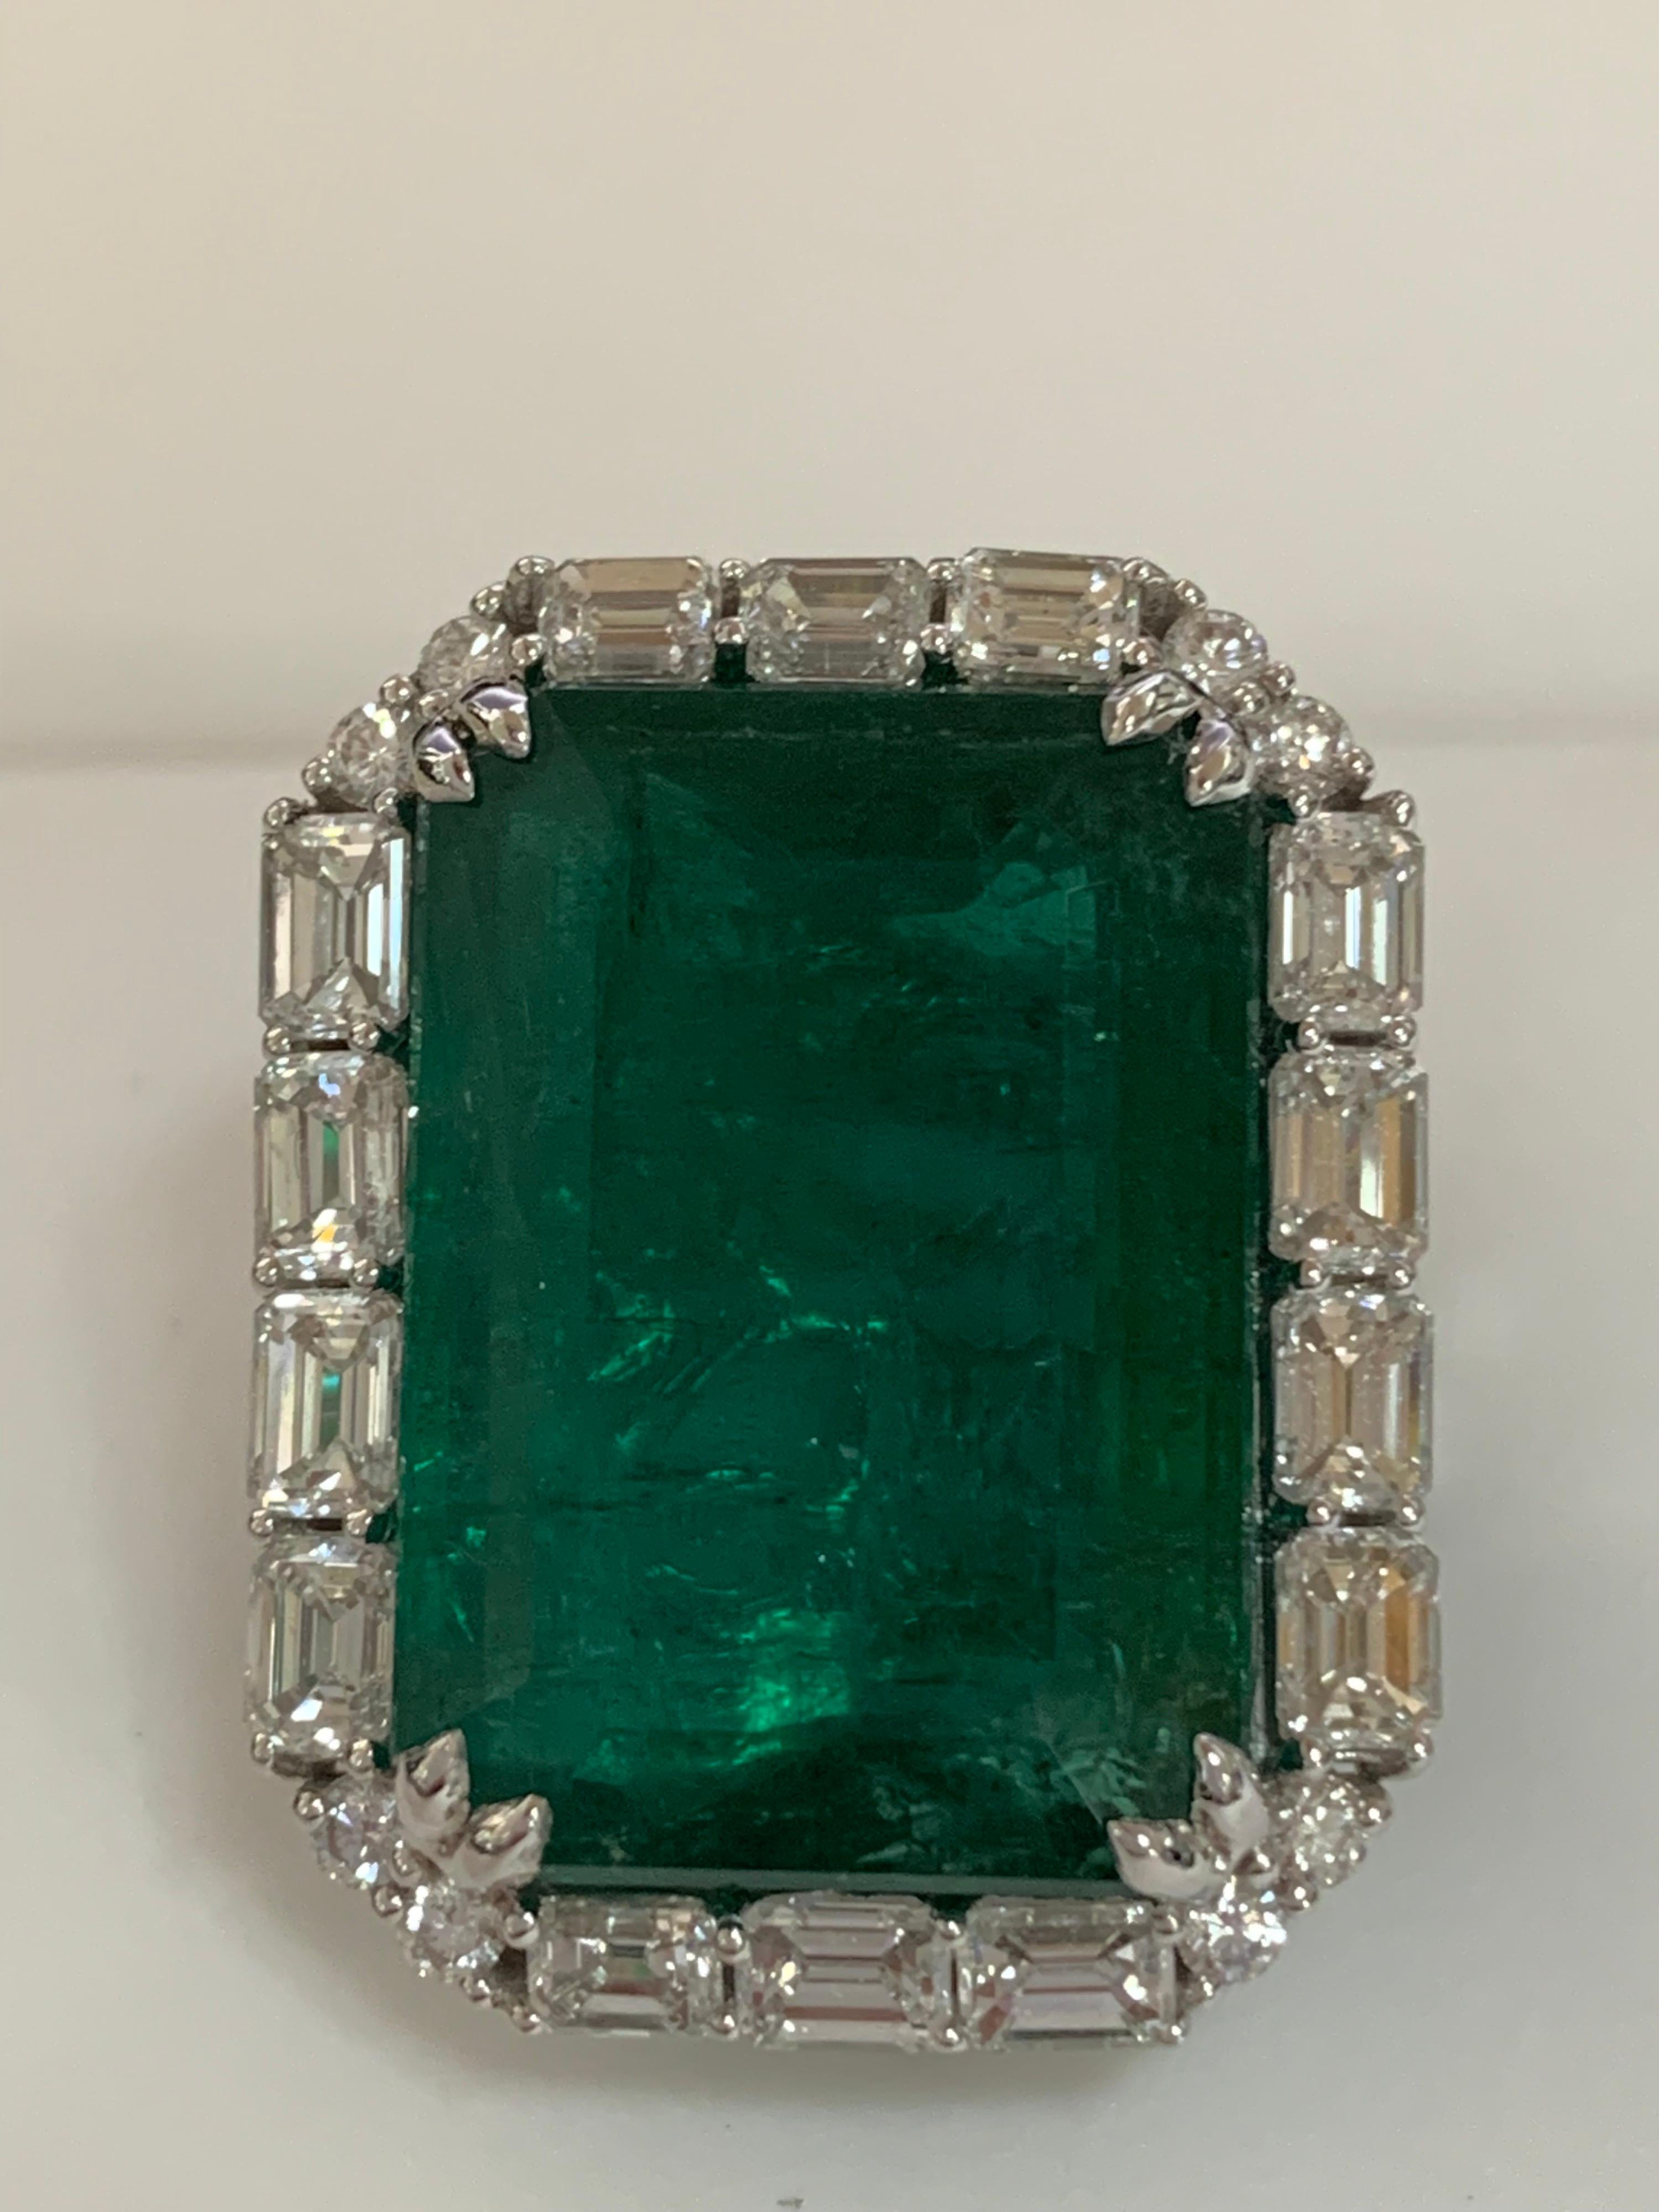 Natural Certified 23.98 Carat Emerald and 5.38 Carat white diamonds set in 18 Karat white gold is one of a kind handcrafted Ring. The ring is size 7 and can be resized if needed. 